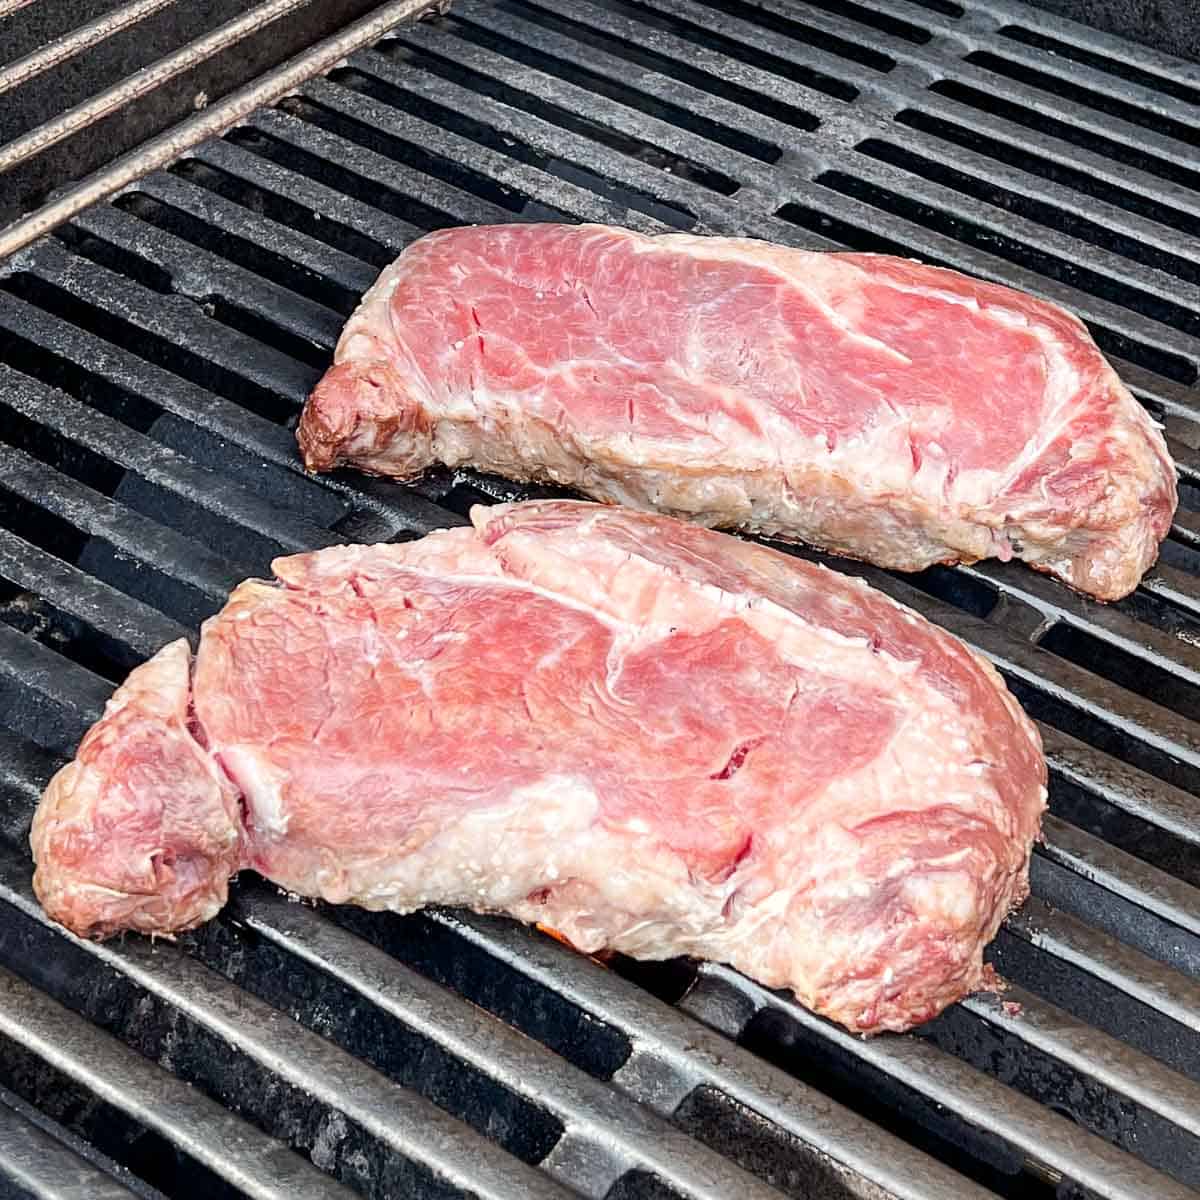 Ribeye steaks just ready to turn over.